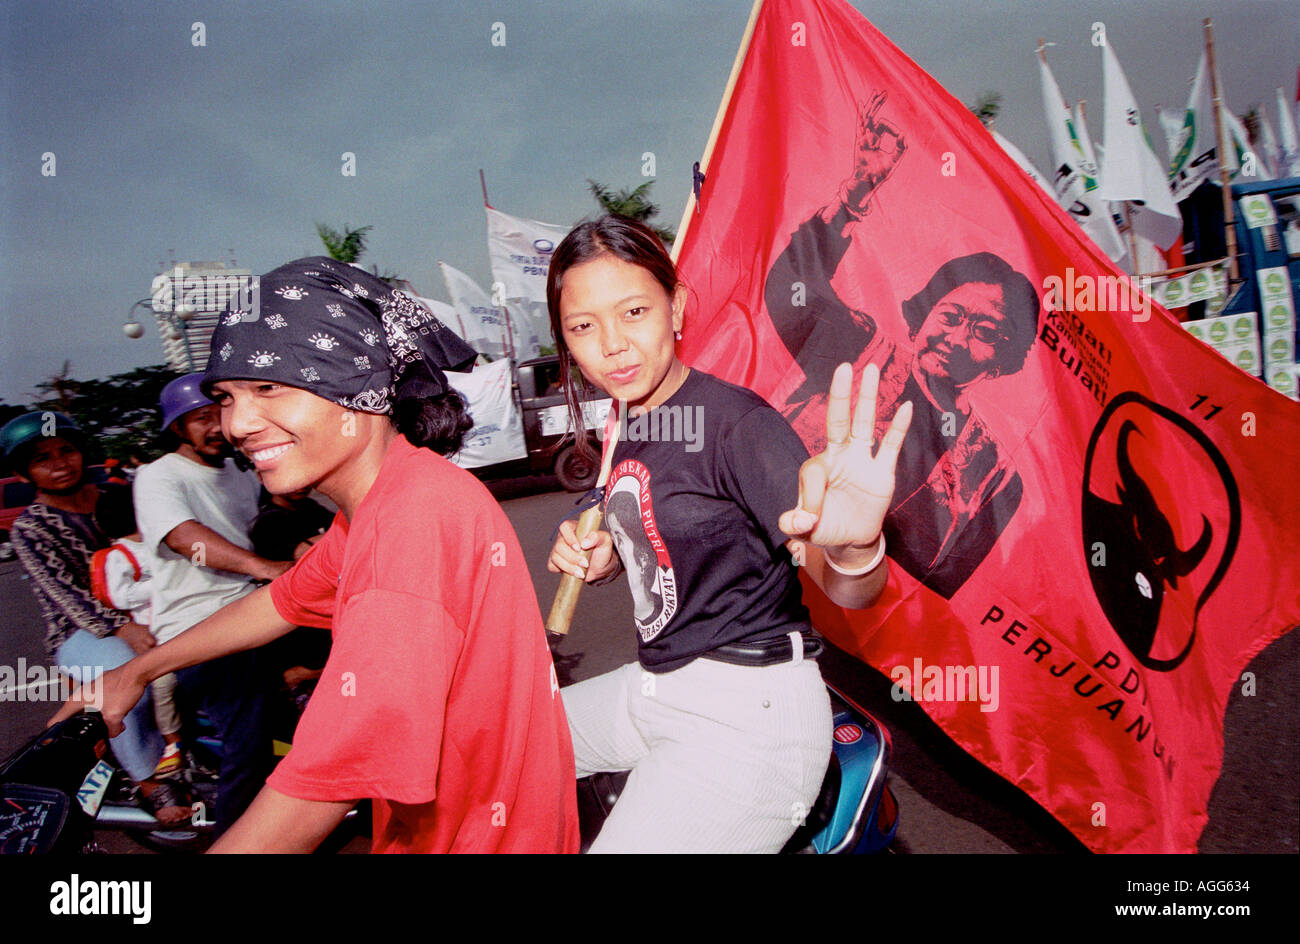 Megawati Sukarnoputri supporters Indonesian elections campaign in the first elections in many years. Stock Photo